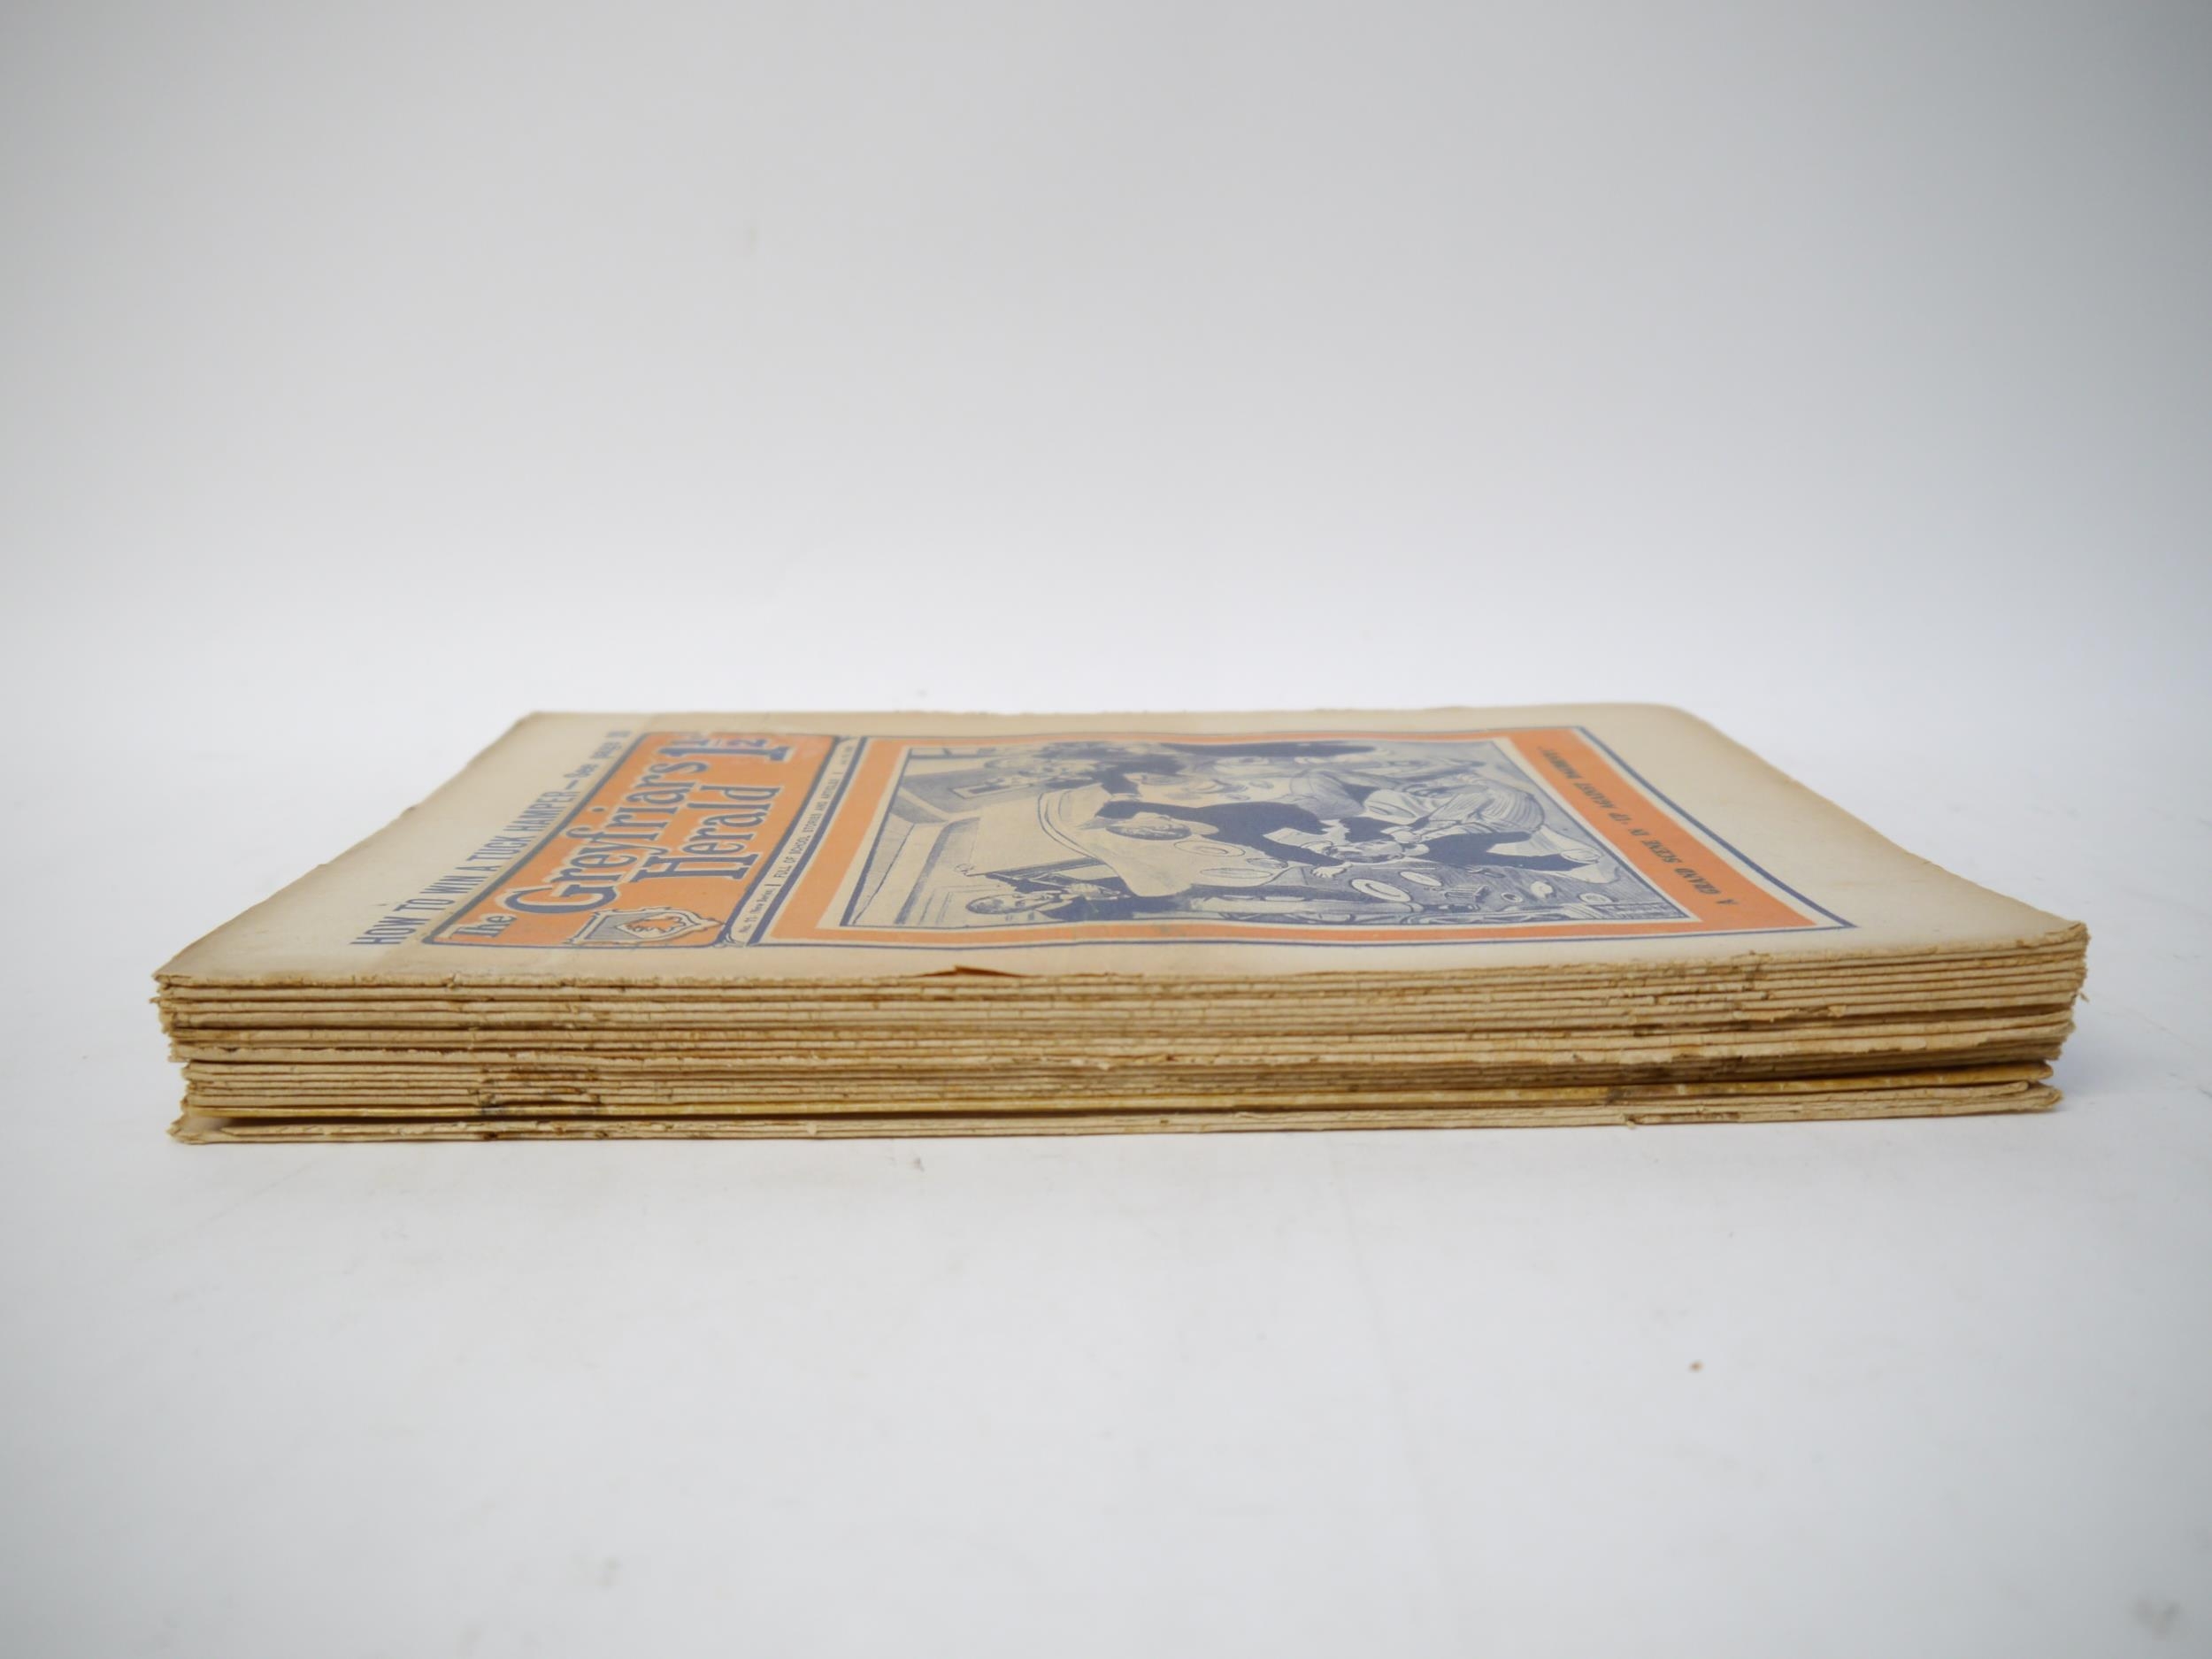 'The Greyfriars Herald', 20 assorted issues 1920, comprising No.'s 11-13, 15-17, 19-32, each - Image 2 of 2